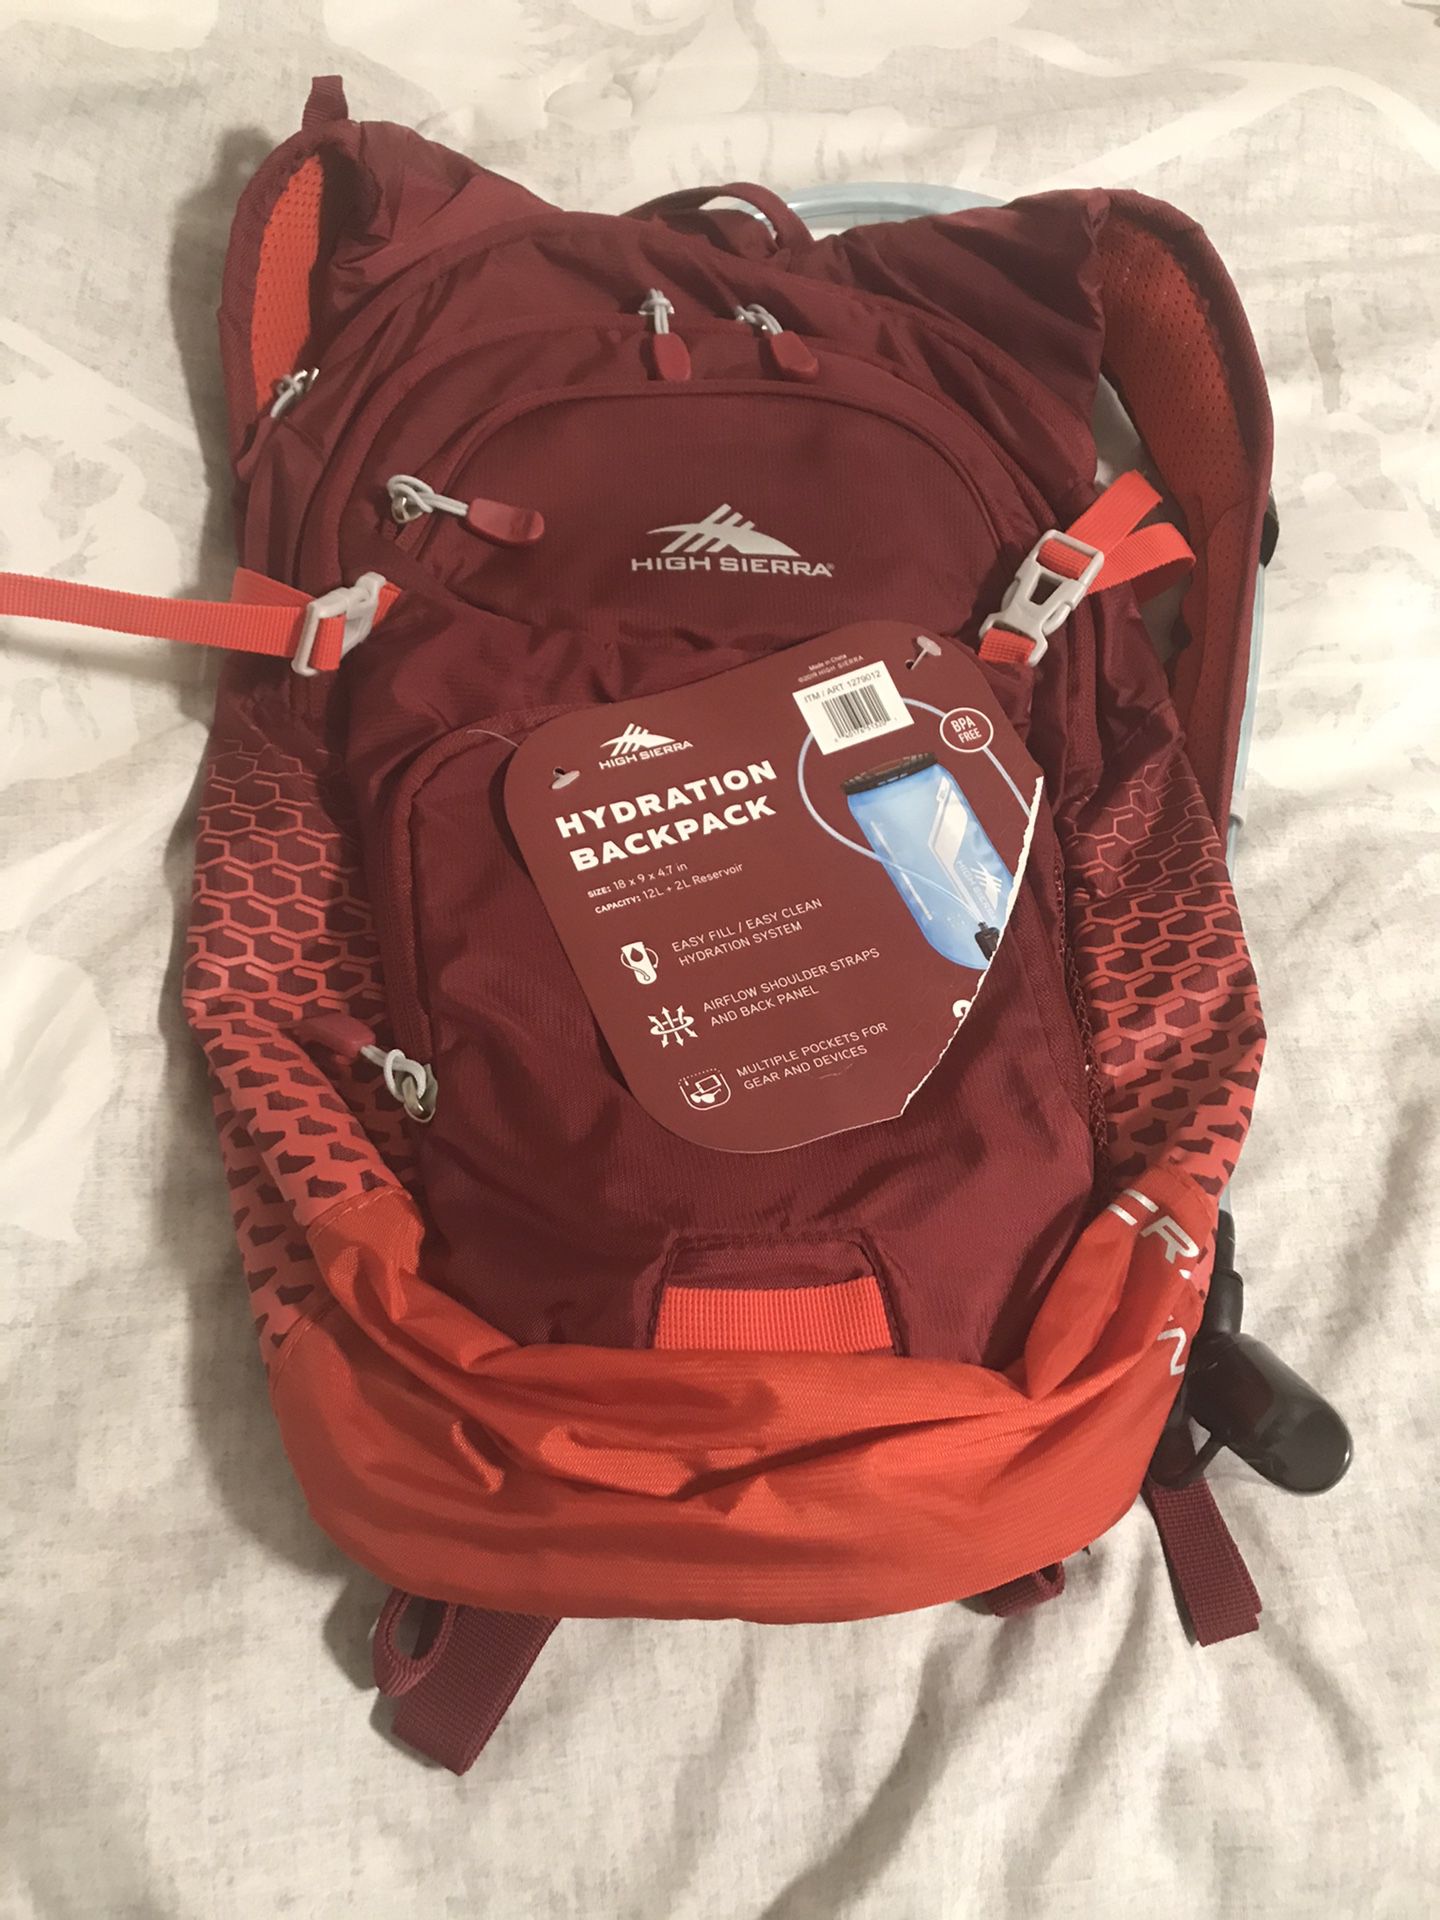 High Sierra hydration back pack brand new never used $20